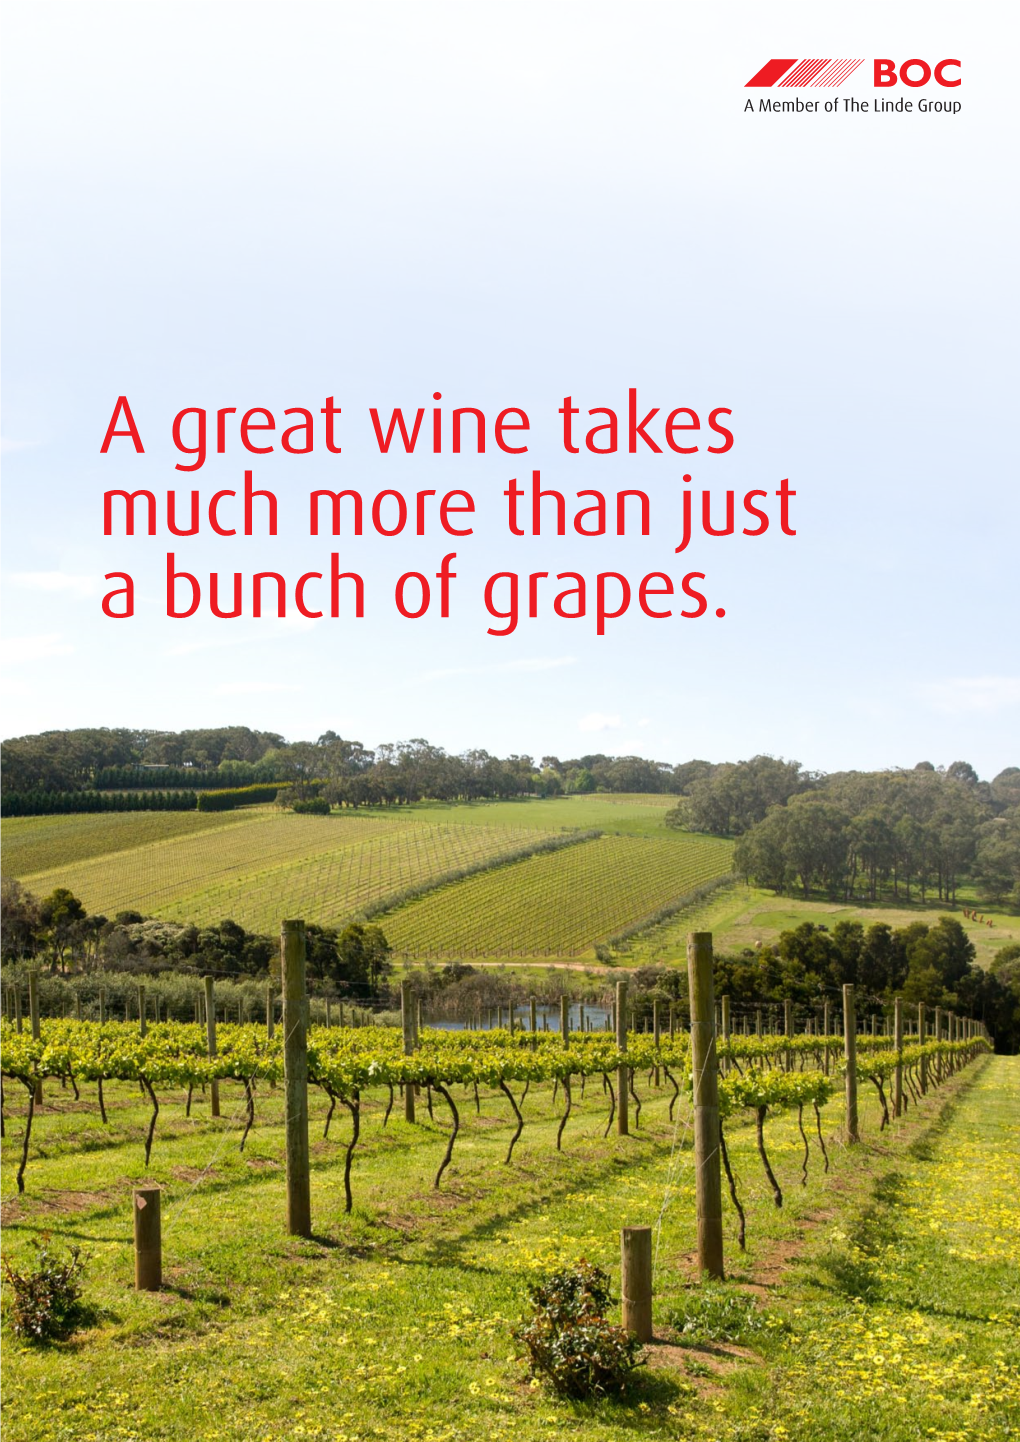 A Great Wine Takes Much More Than Just a Bunch of Grapes. 2 BOC Winery Solutions